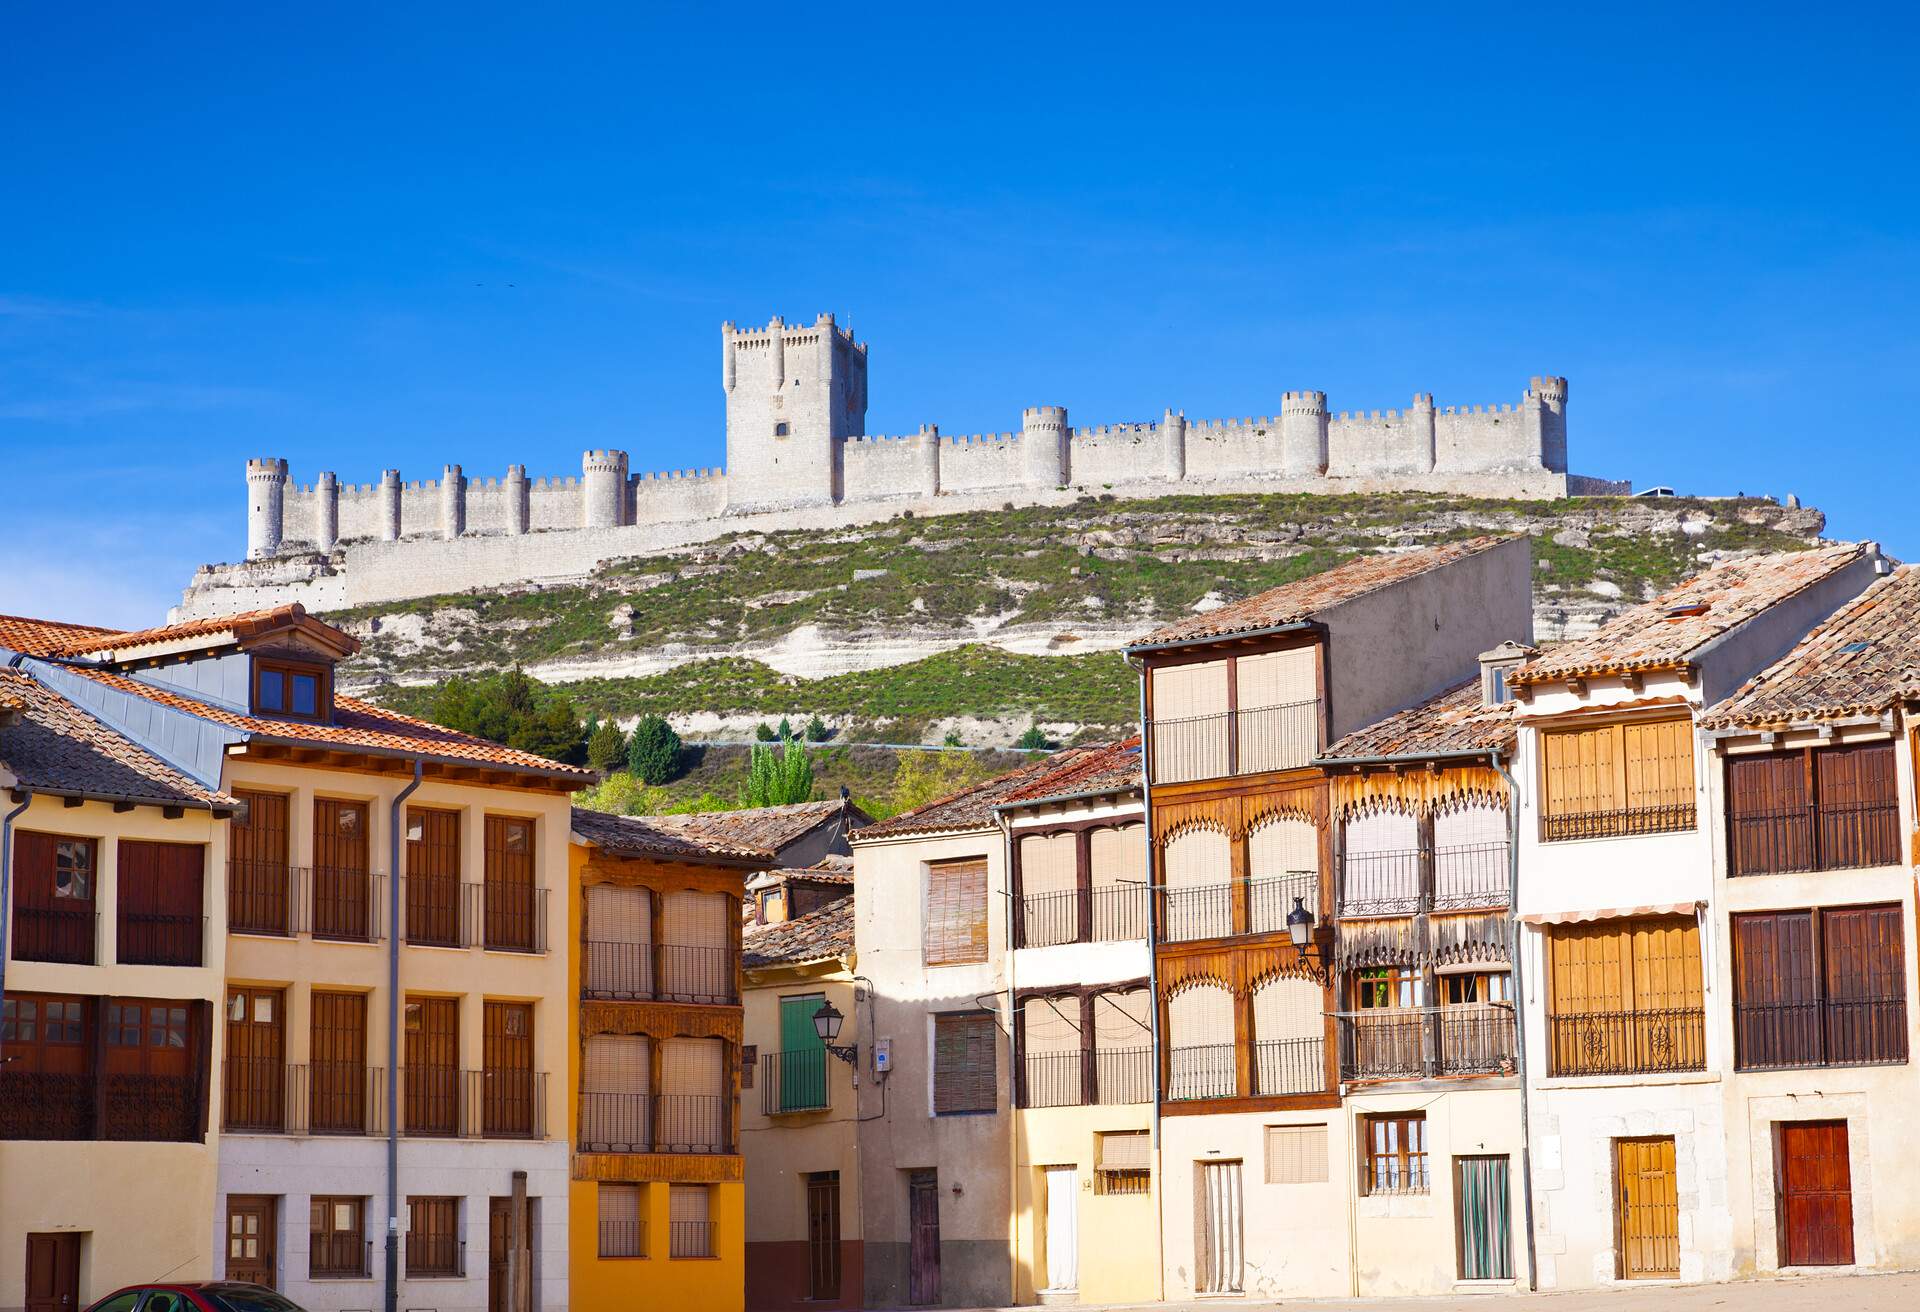 with the castle and a blue sky as background. Valladolid, Spain.